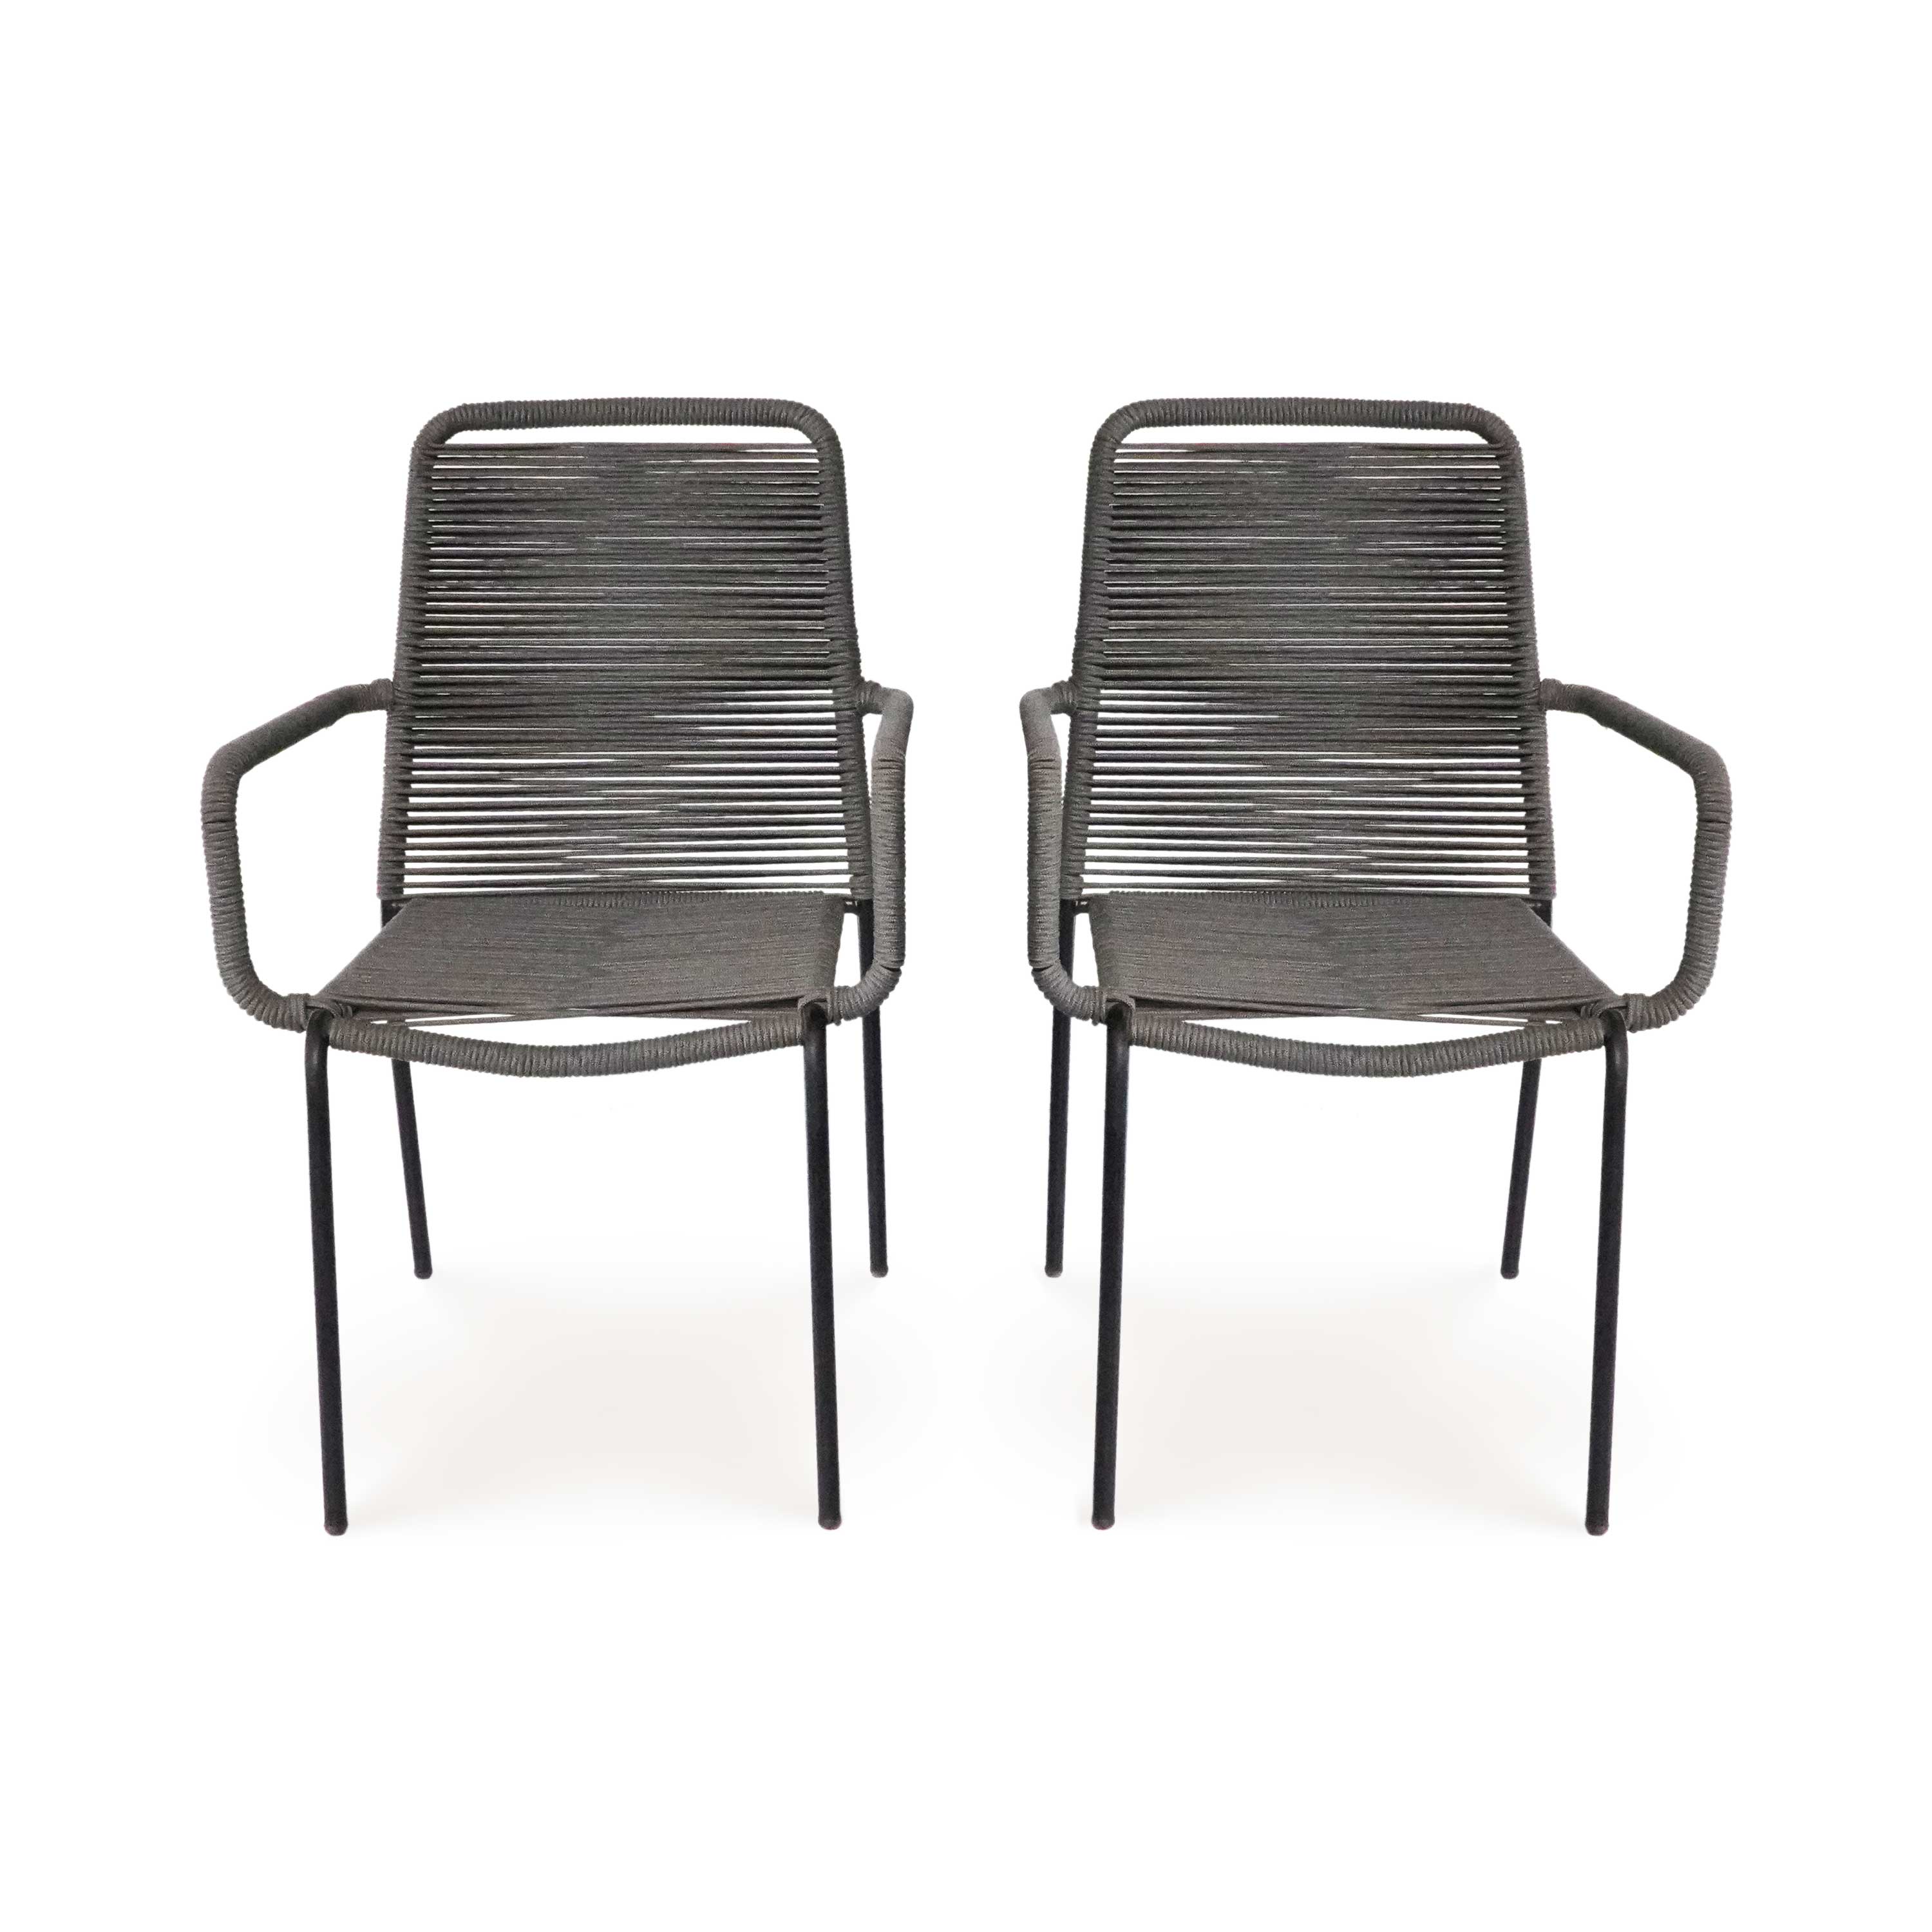 Palaio Rope Outdoor Dining Chair - Grey (Set of 2)